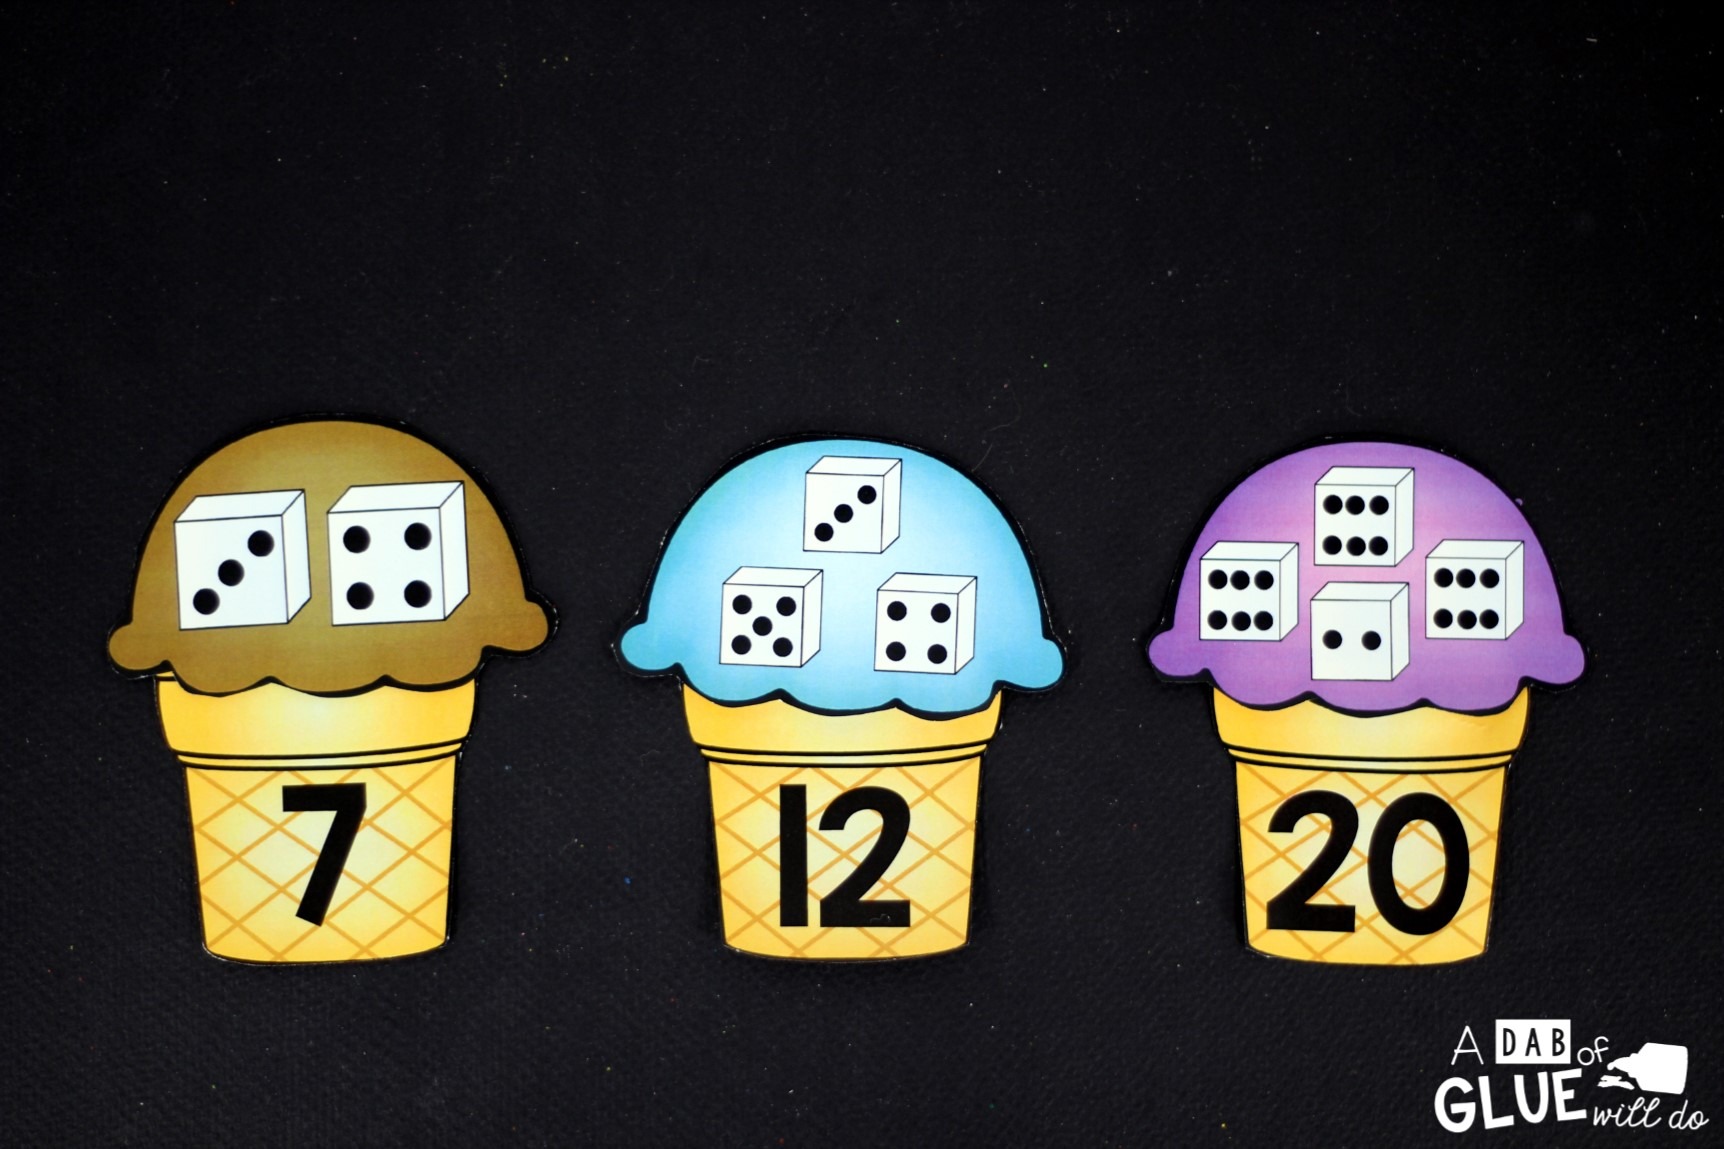 Matching Numbers with Ice Cream includes nine pages of ice cream scoops, numbers four through 20. Each ice cream cone has a number written on it and each ice cream scoop has two to four dice. Students will count the number of dots on each dice and then match it to the correctly numbered cone.